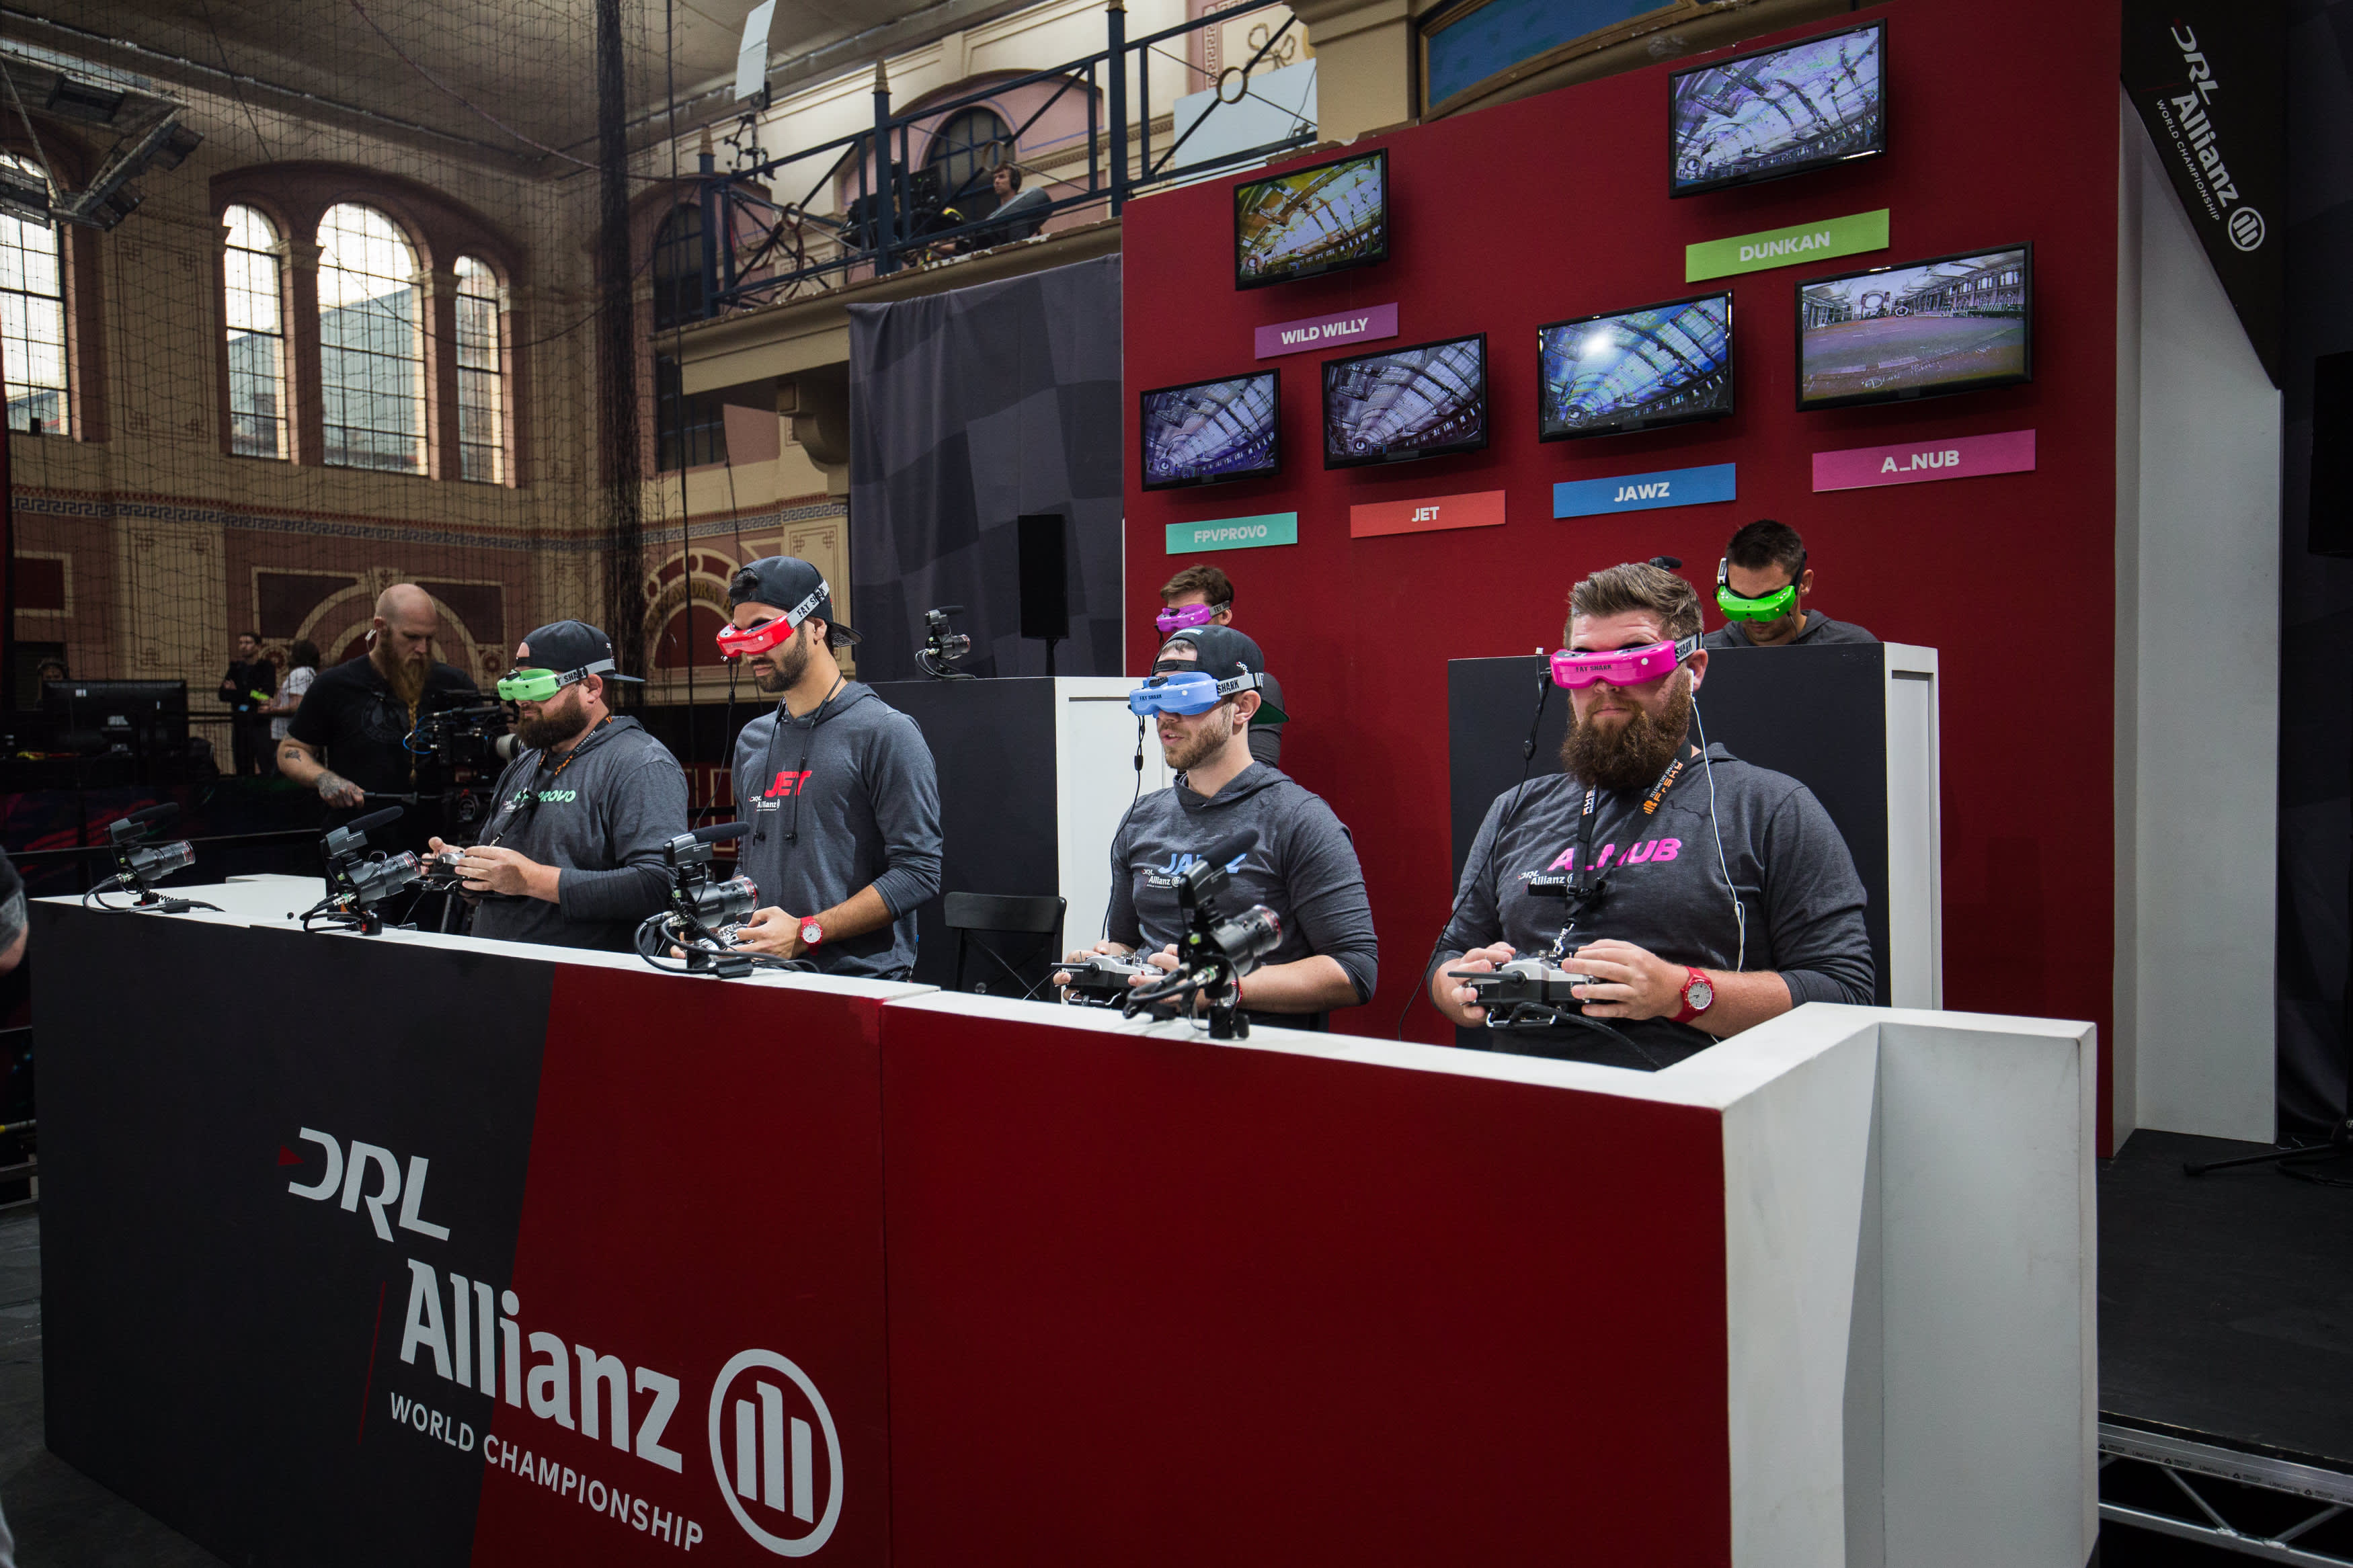 The DraftKings and Drone Racing League partnership allows you to bet on drone races